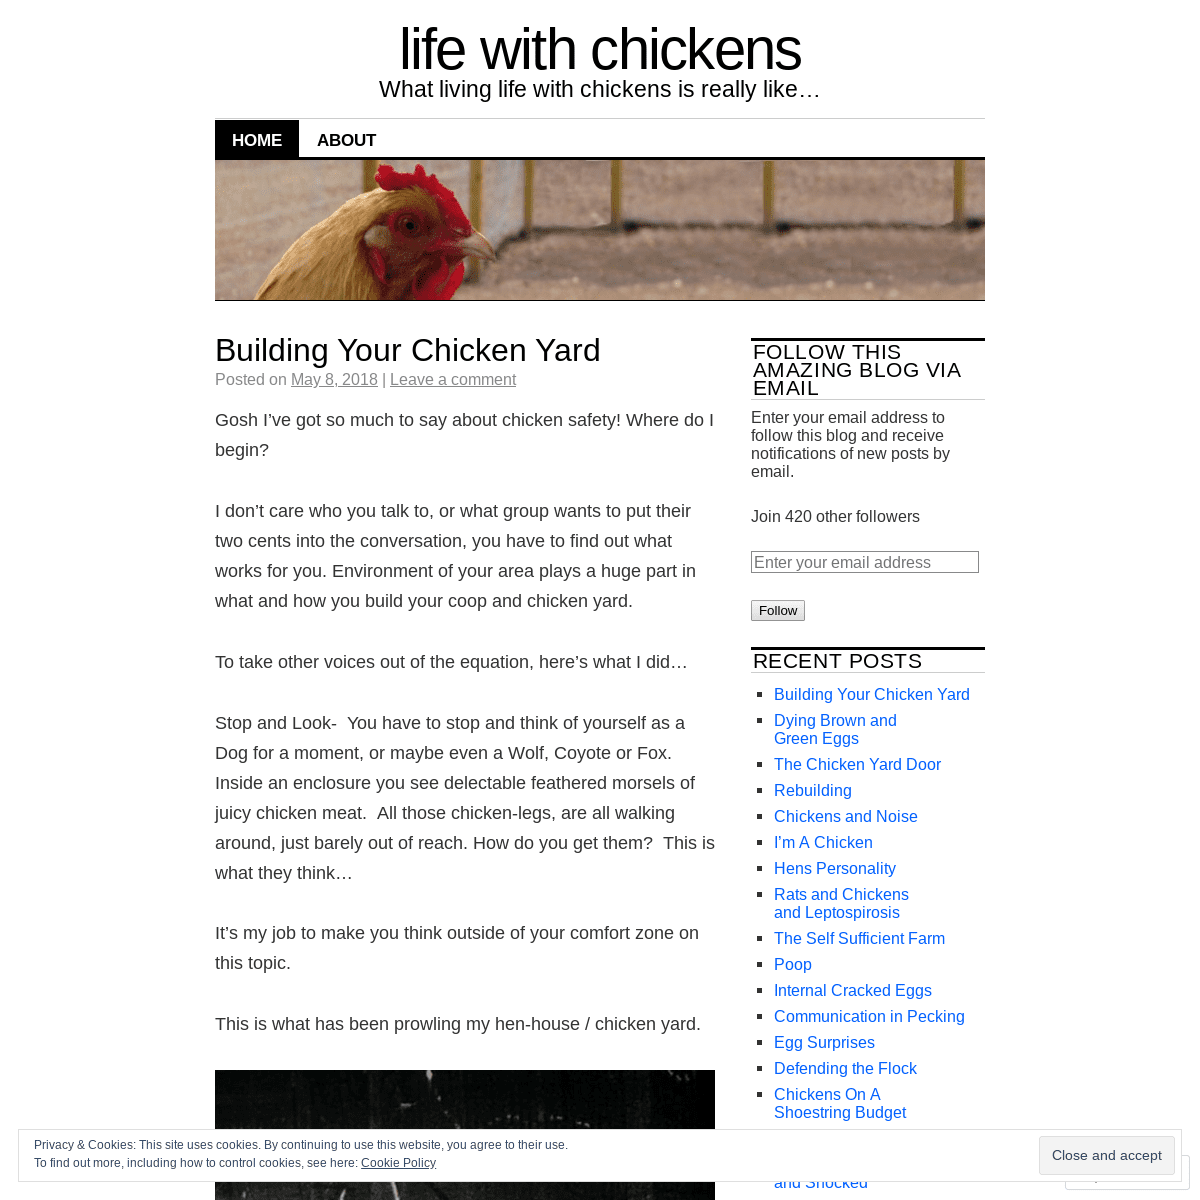 A complete backup of lifewithchickens.wordpress.com